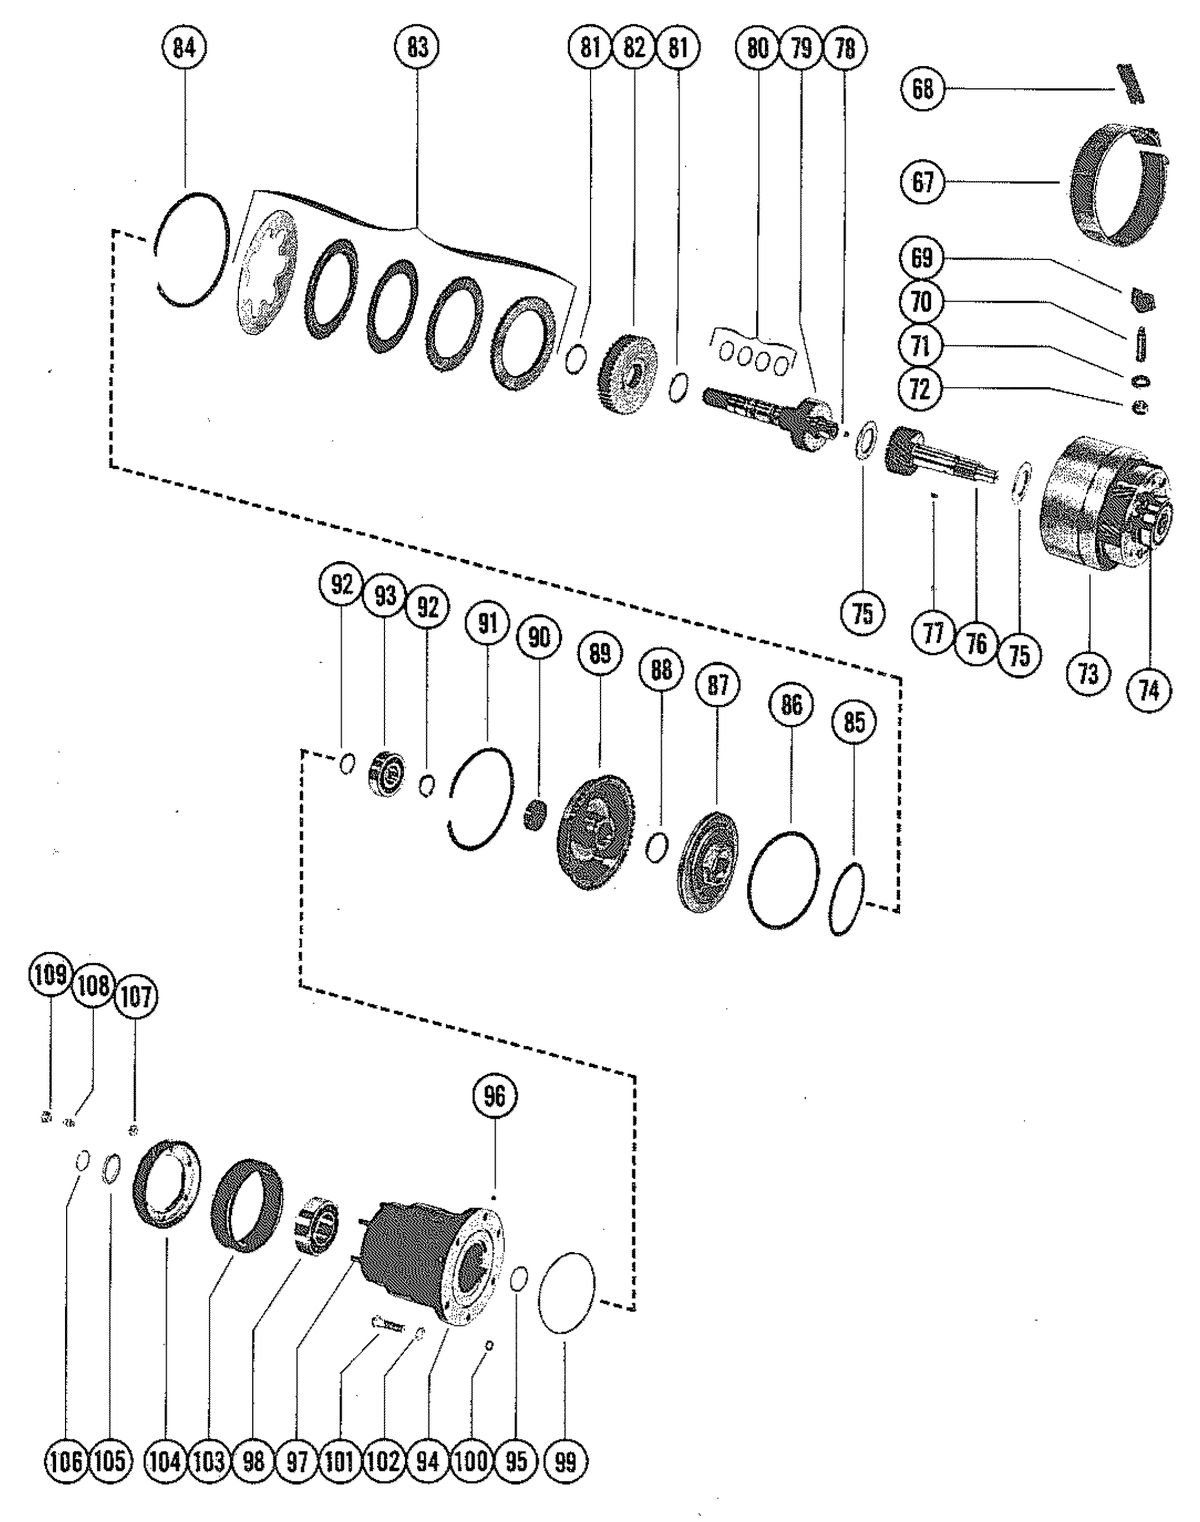 MERCRUISER 330 ENGINE (G.M.) TRANSMISSION ASSEMBLY (STERN DRIVE) PAGE 2